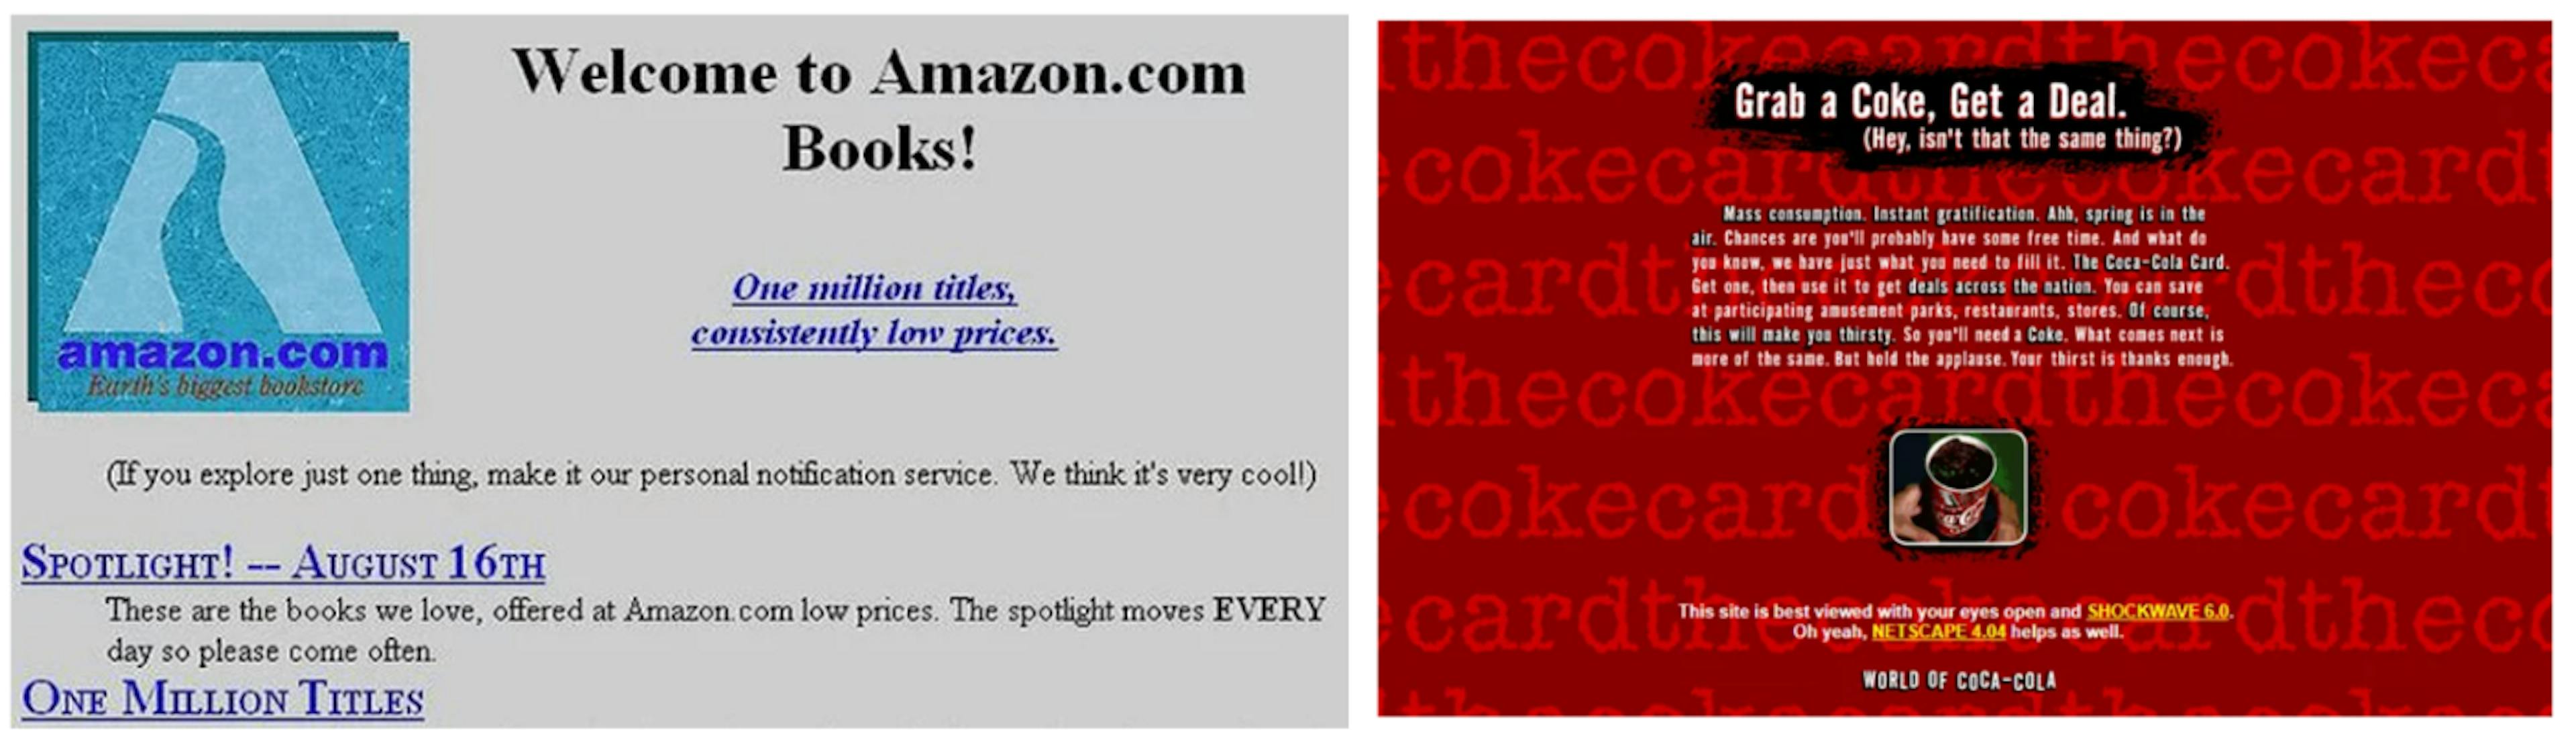 Old versions of Amazon and Coca Cola websites